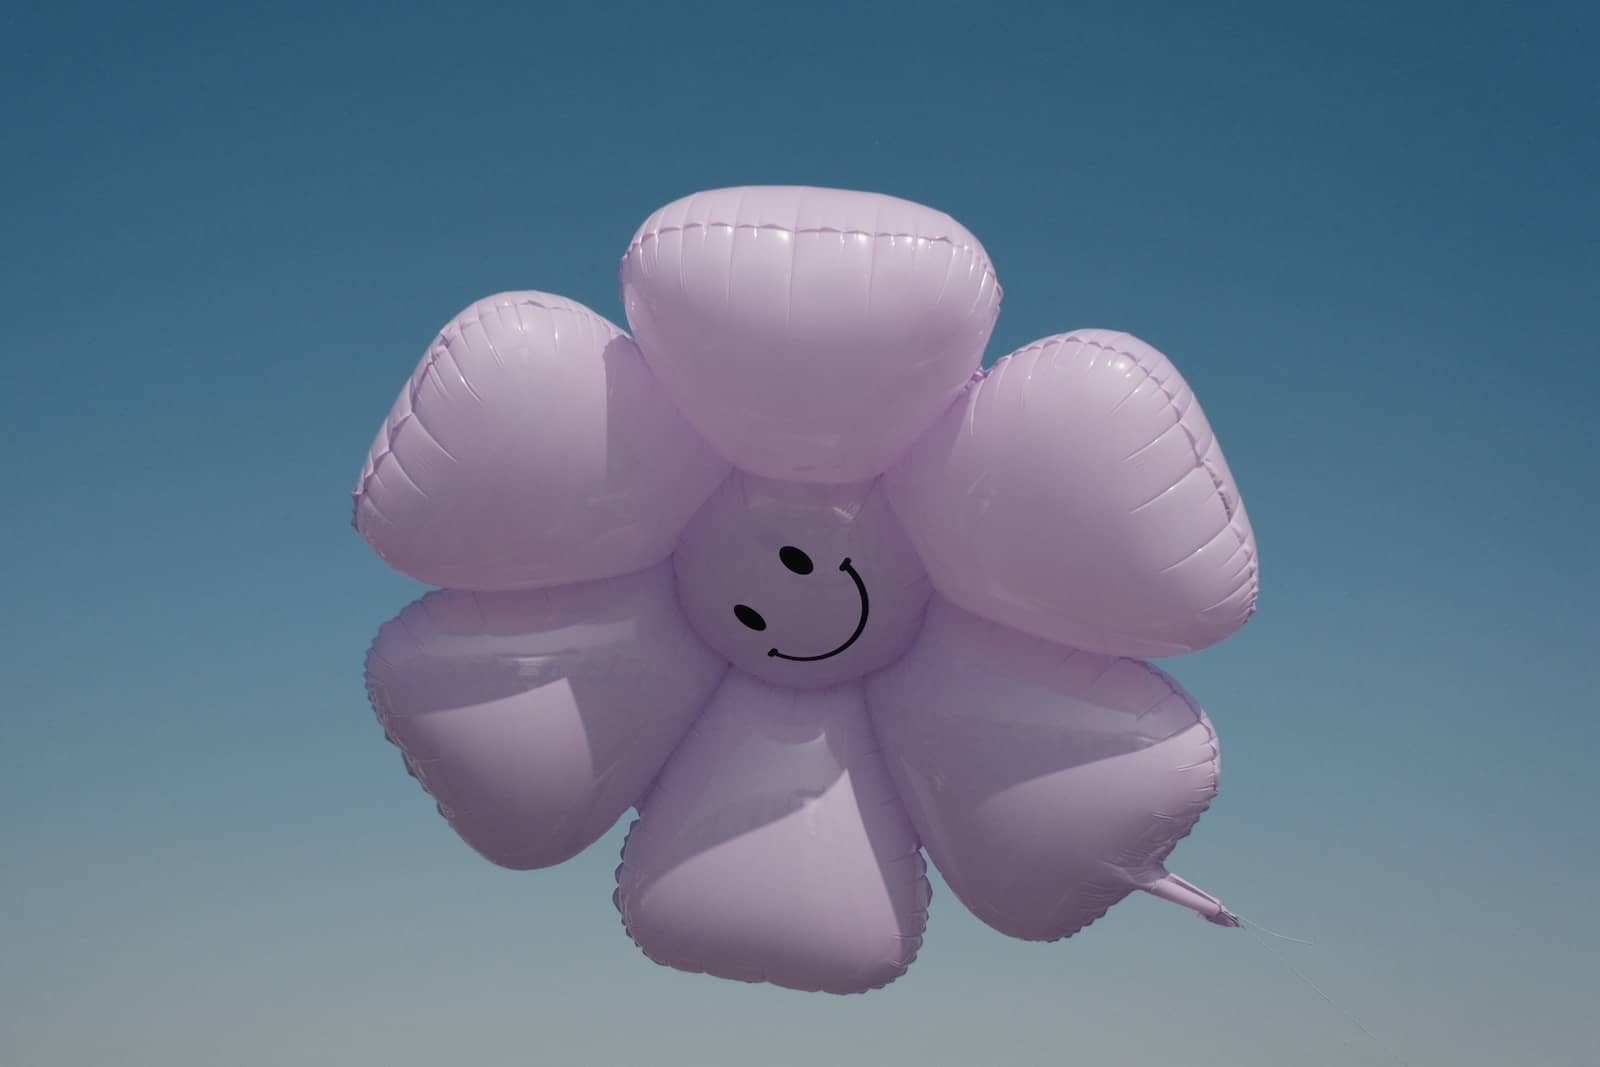 a balloon shaped like a flower with a smiley face drawn on it